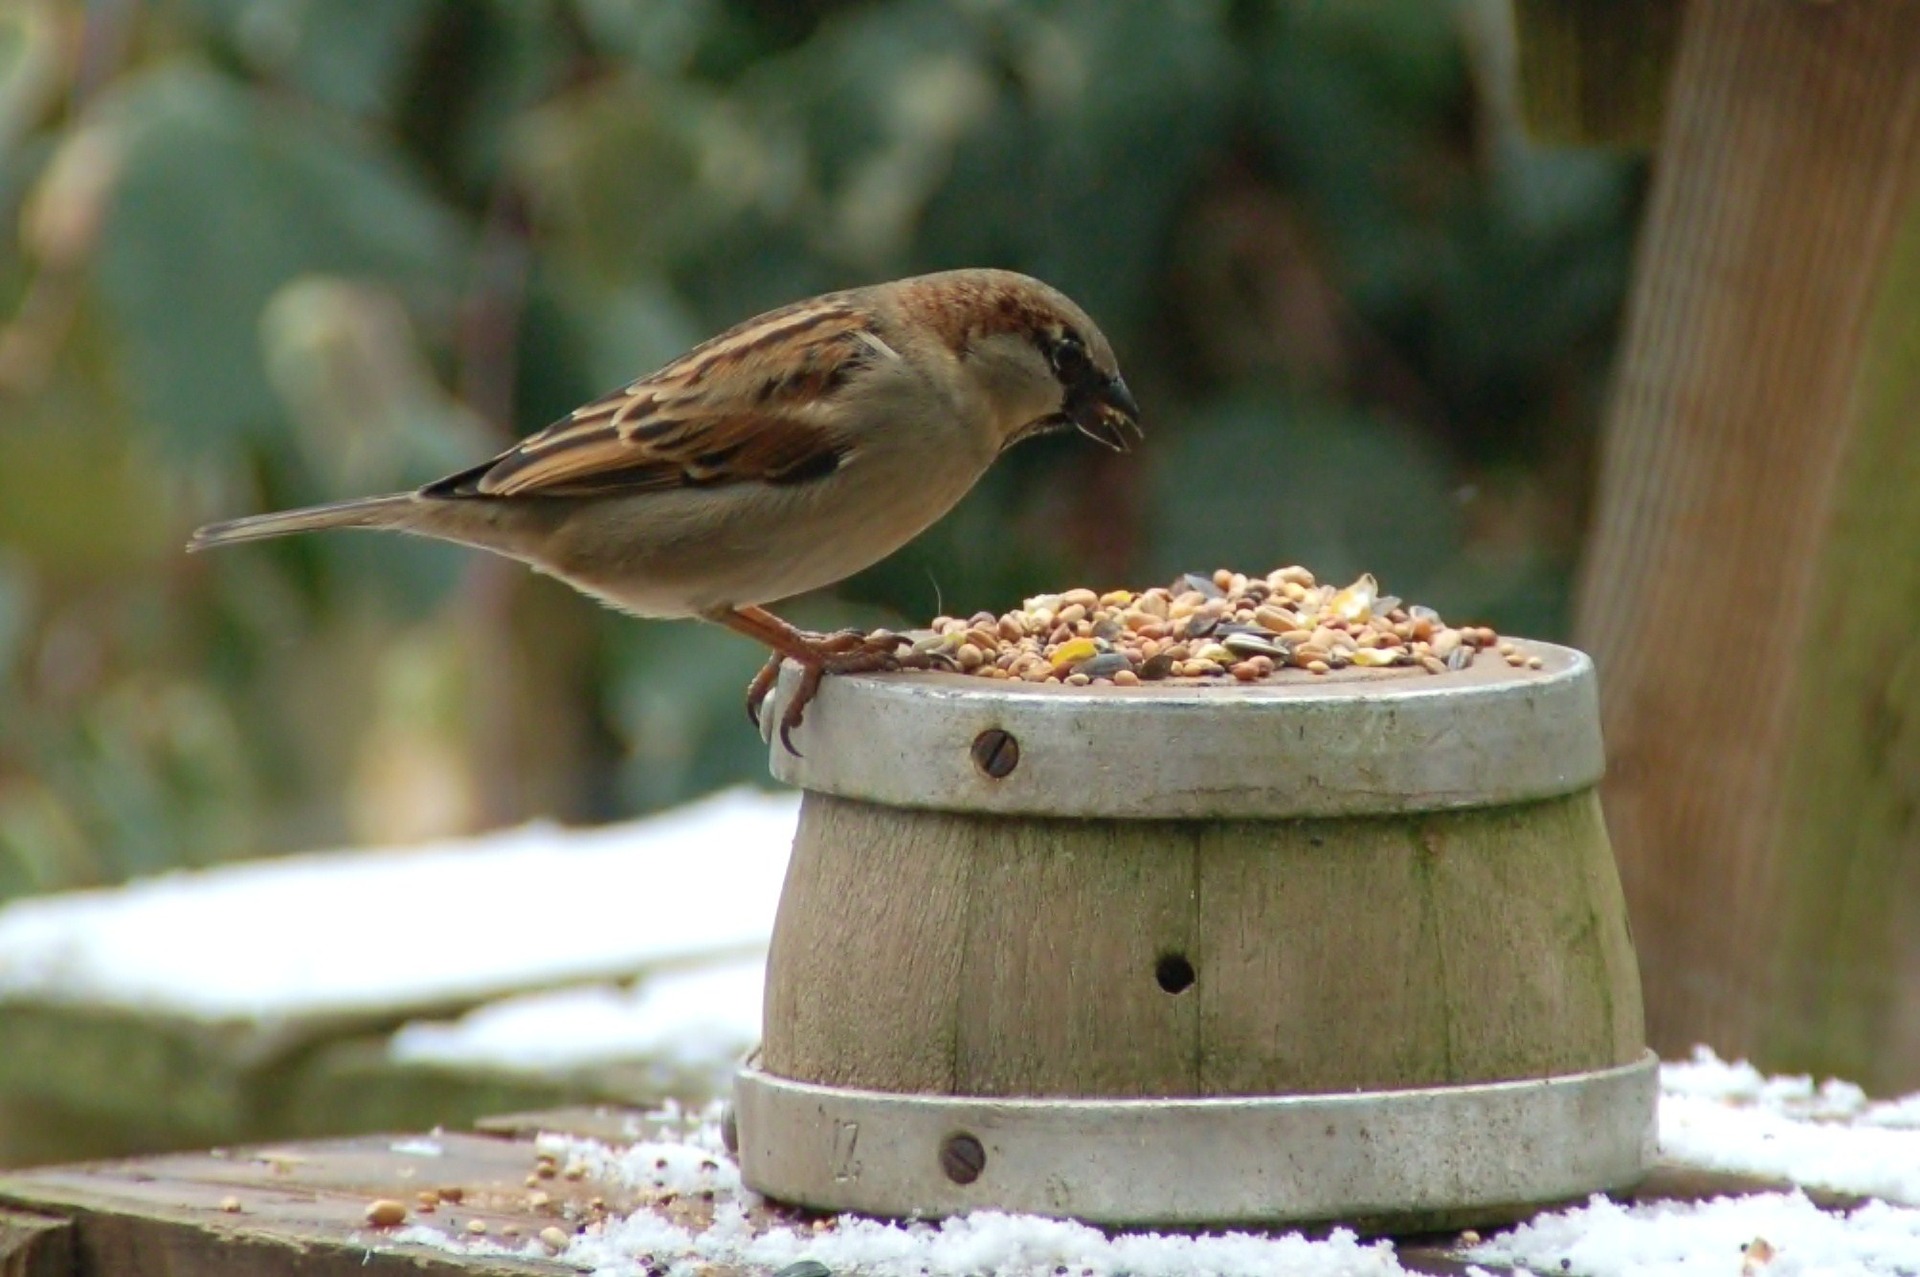 A sparrow eating feed out of a barrel.